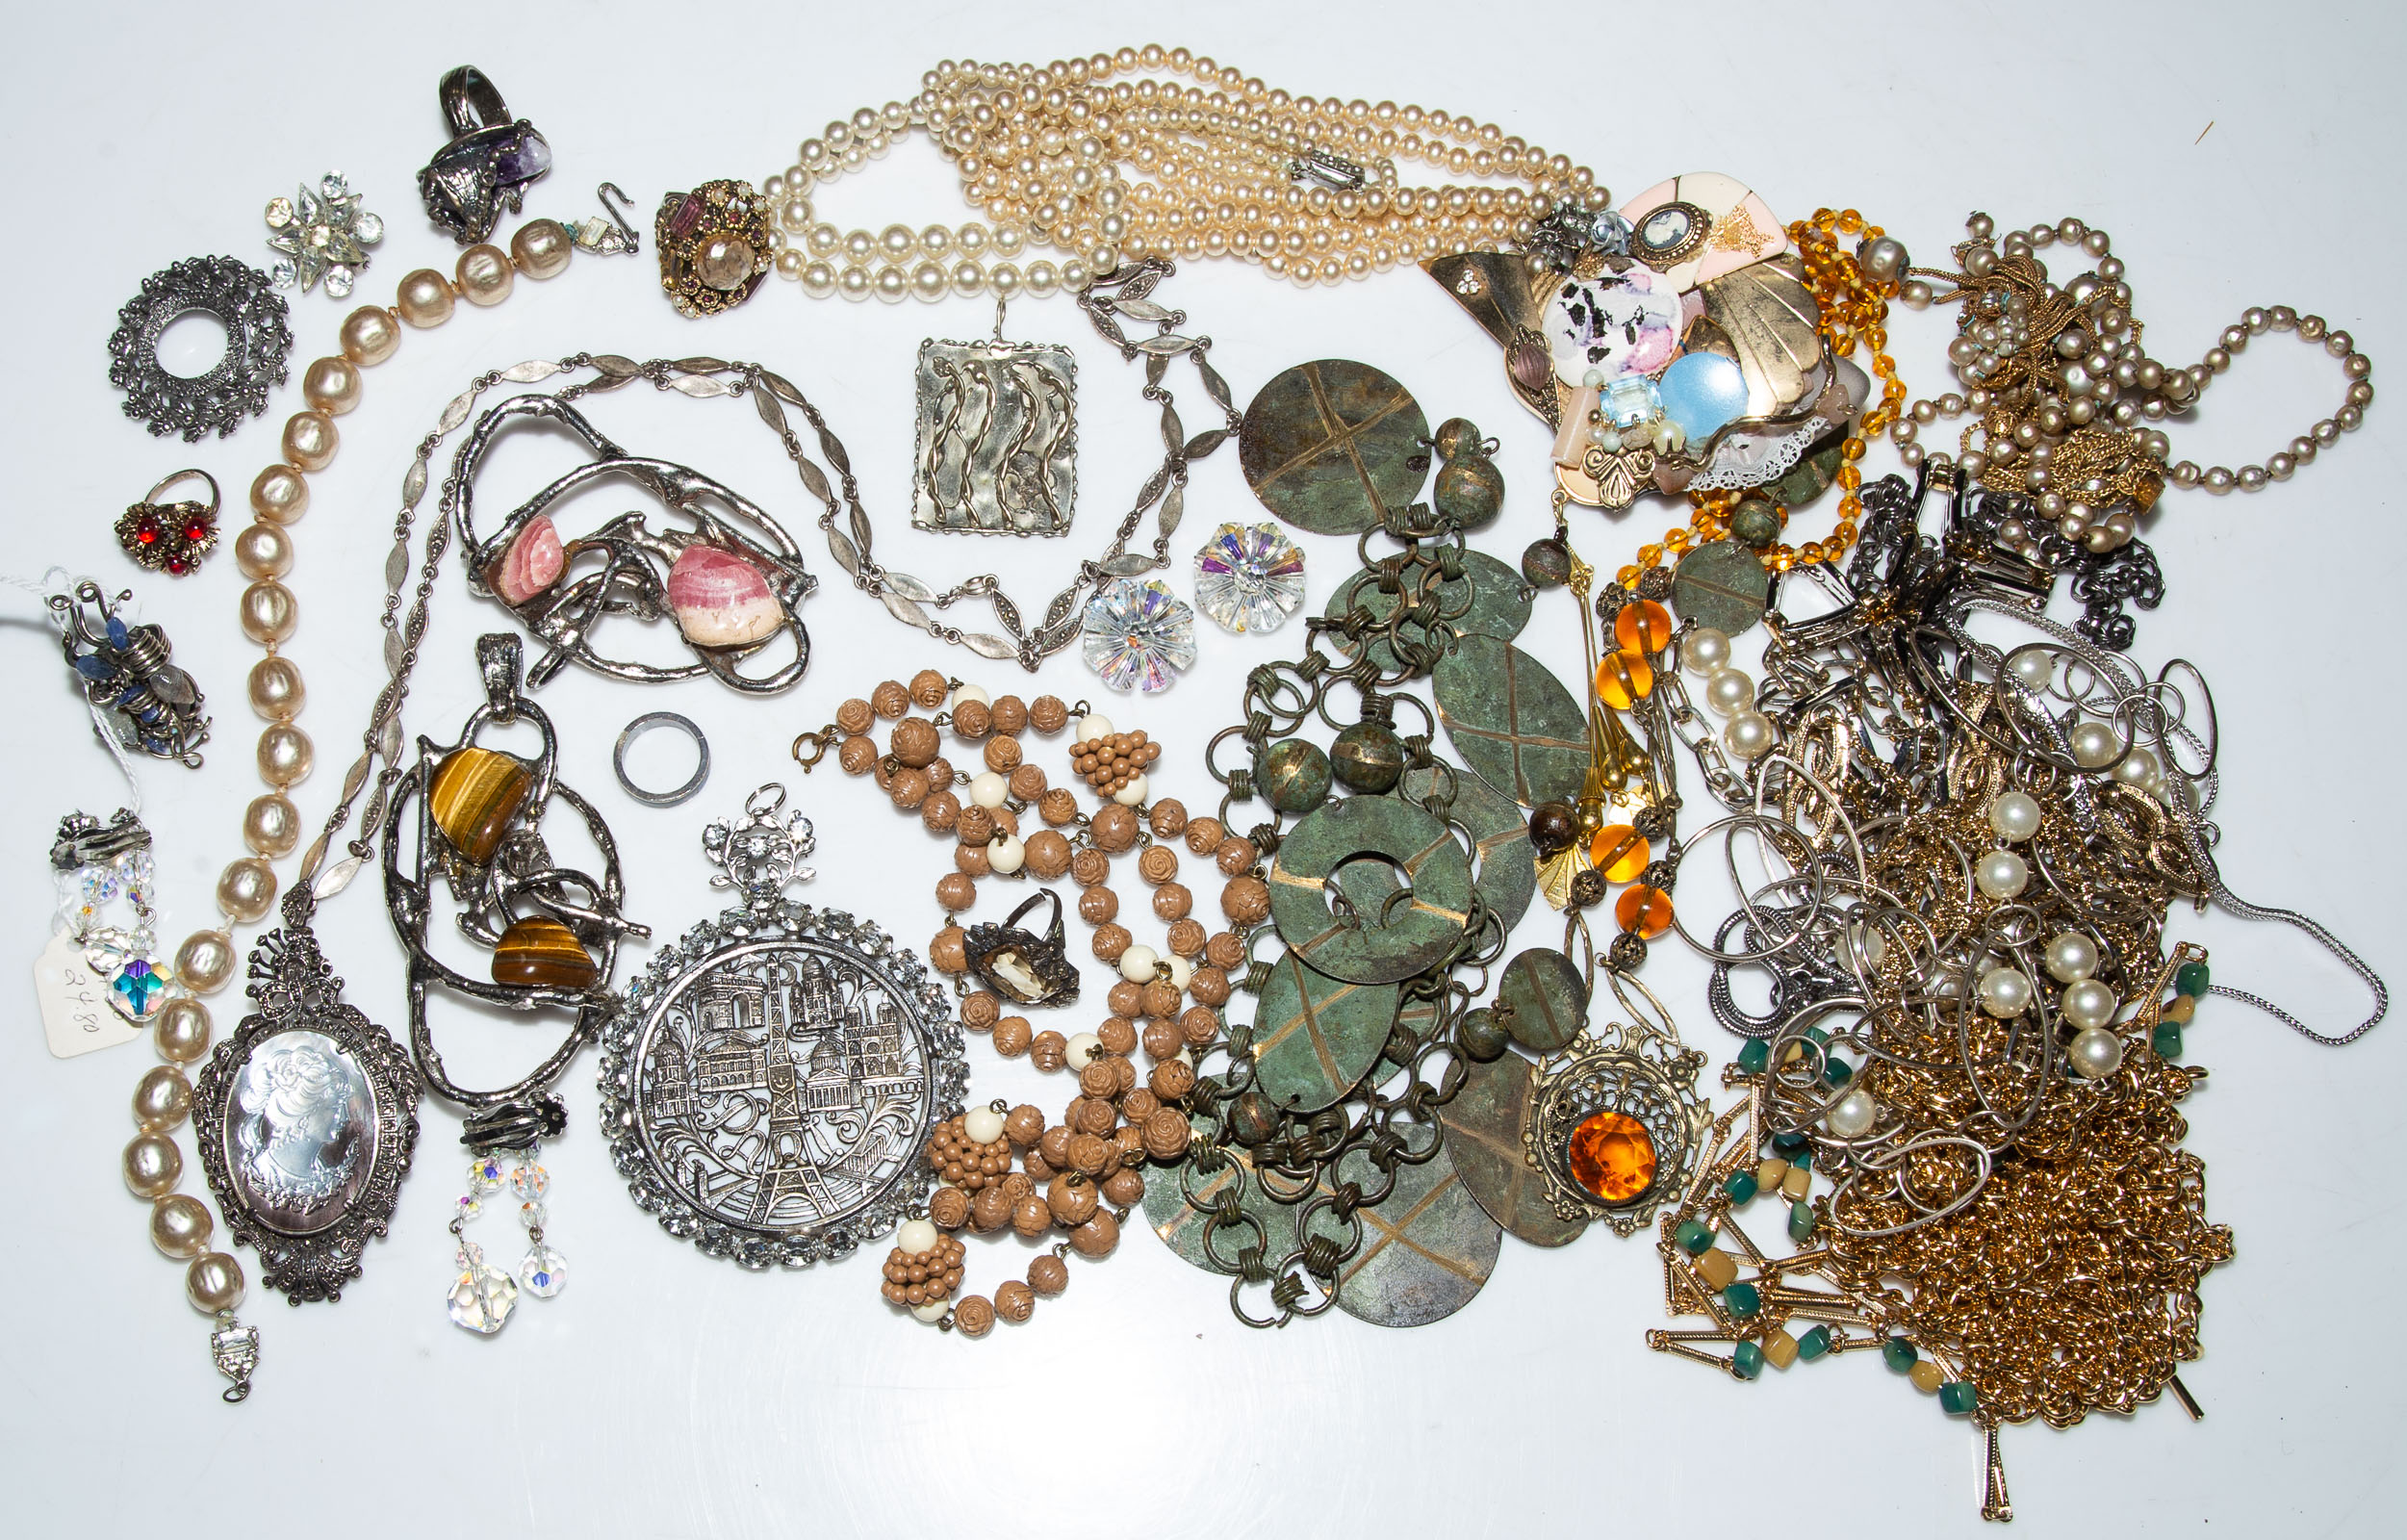 A COLLECTION OF VINTAGE FASHION JEWELRY